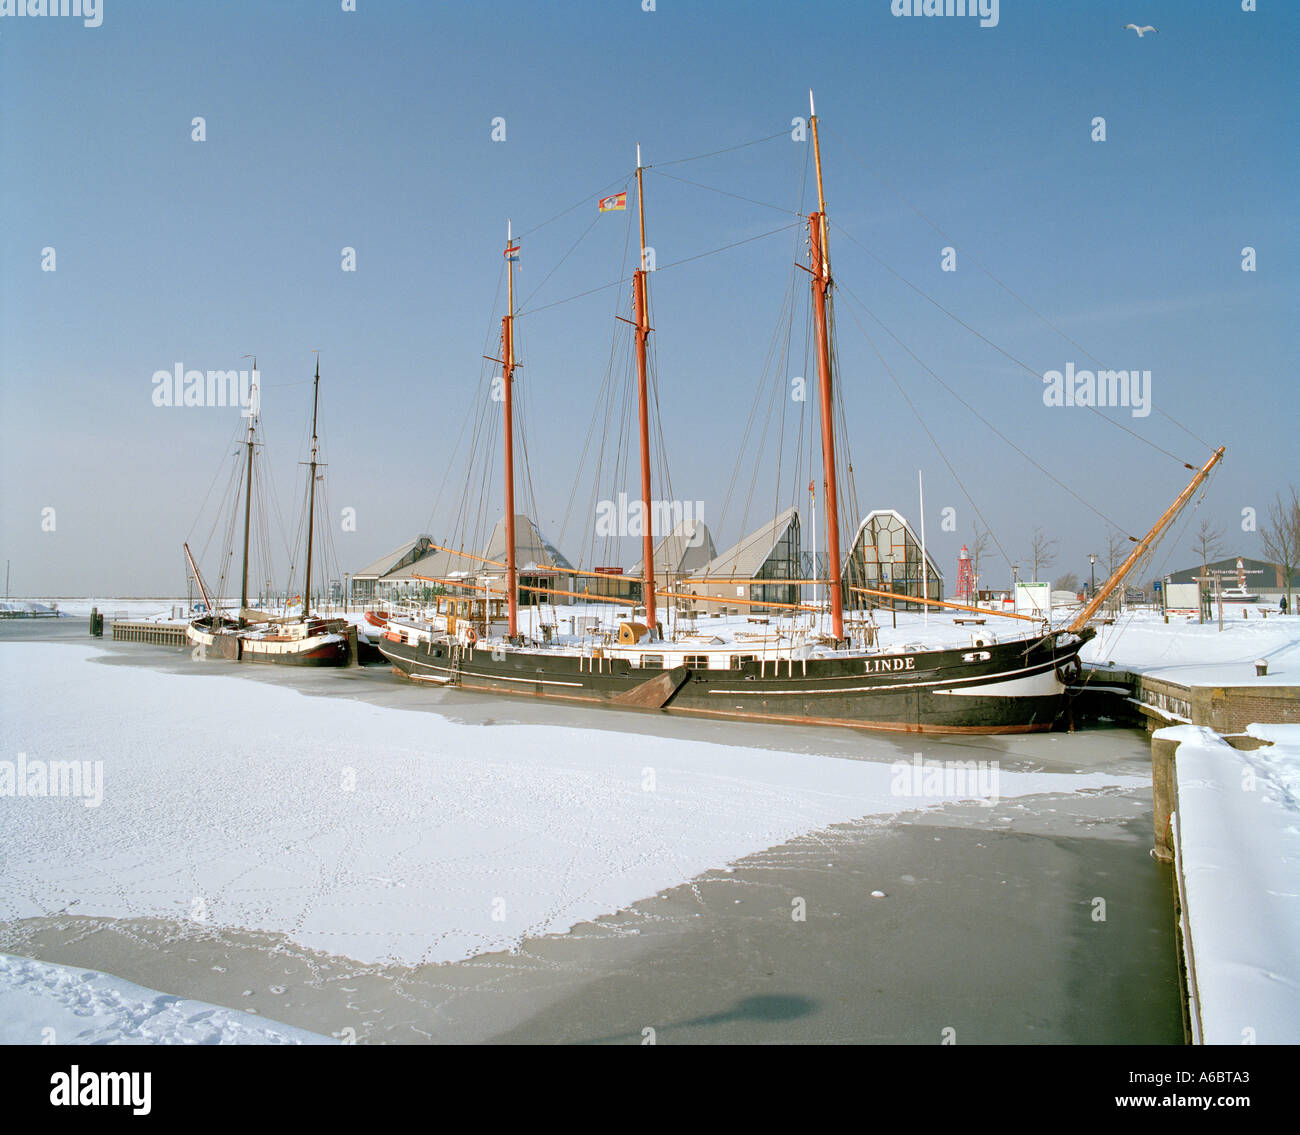 Stavoren harbour in winter with traditional ships in ice and snow Stock Photo